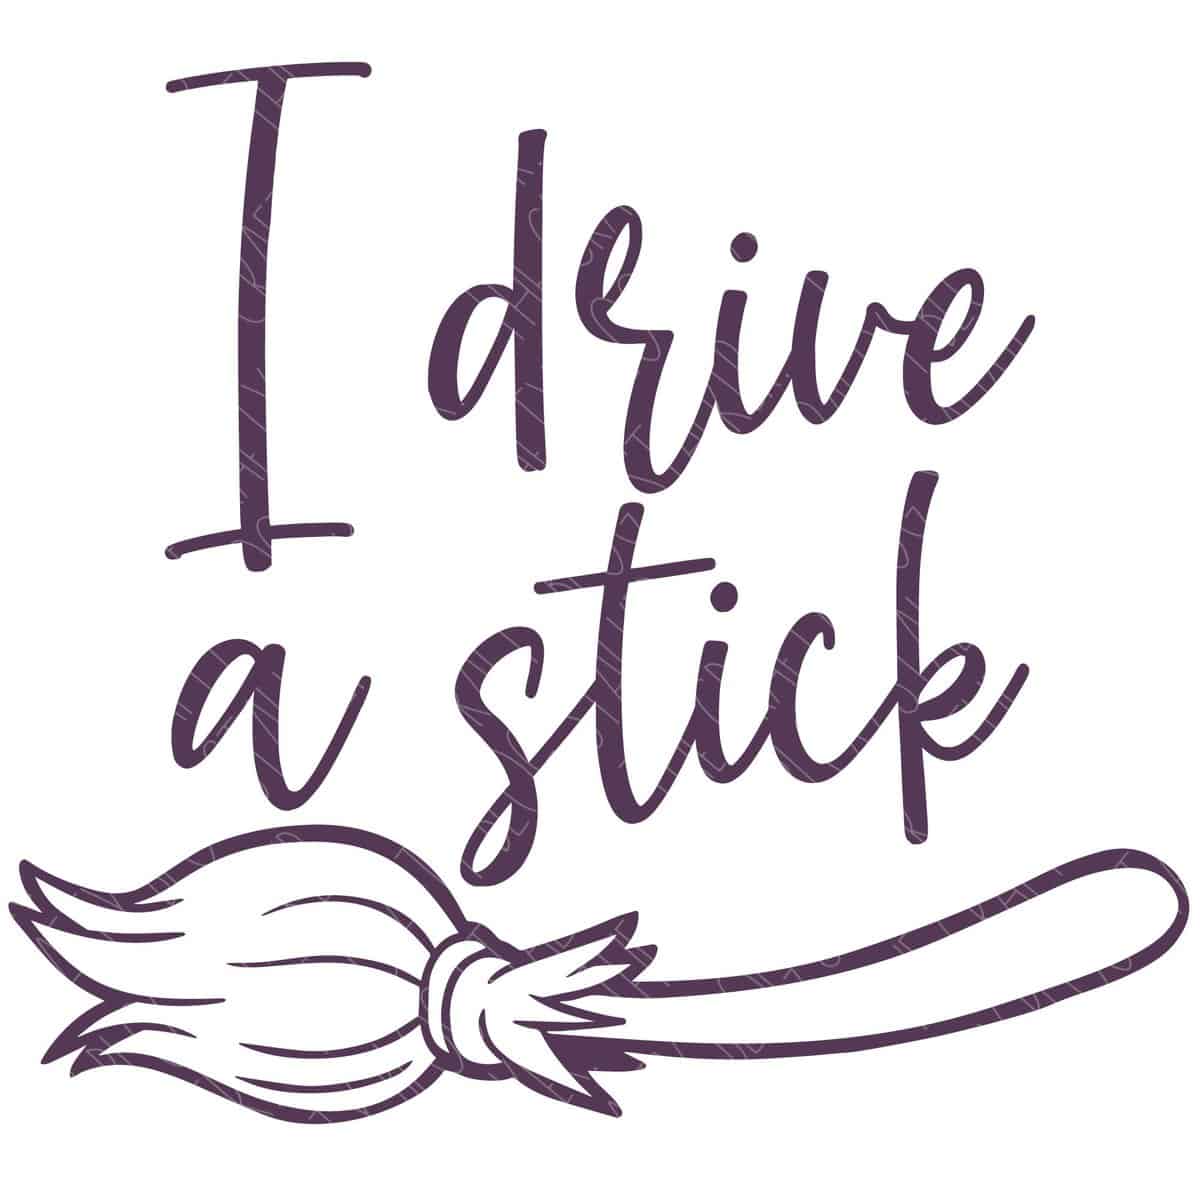 I Drive A Stick SVG	

			
		
	

		
			$3.00 – Buy Now Checkout
							
					
						
							
						
						Added to cart